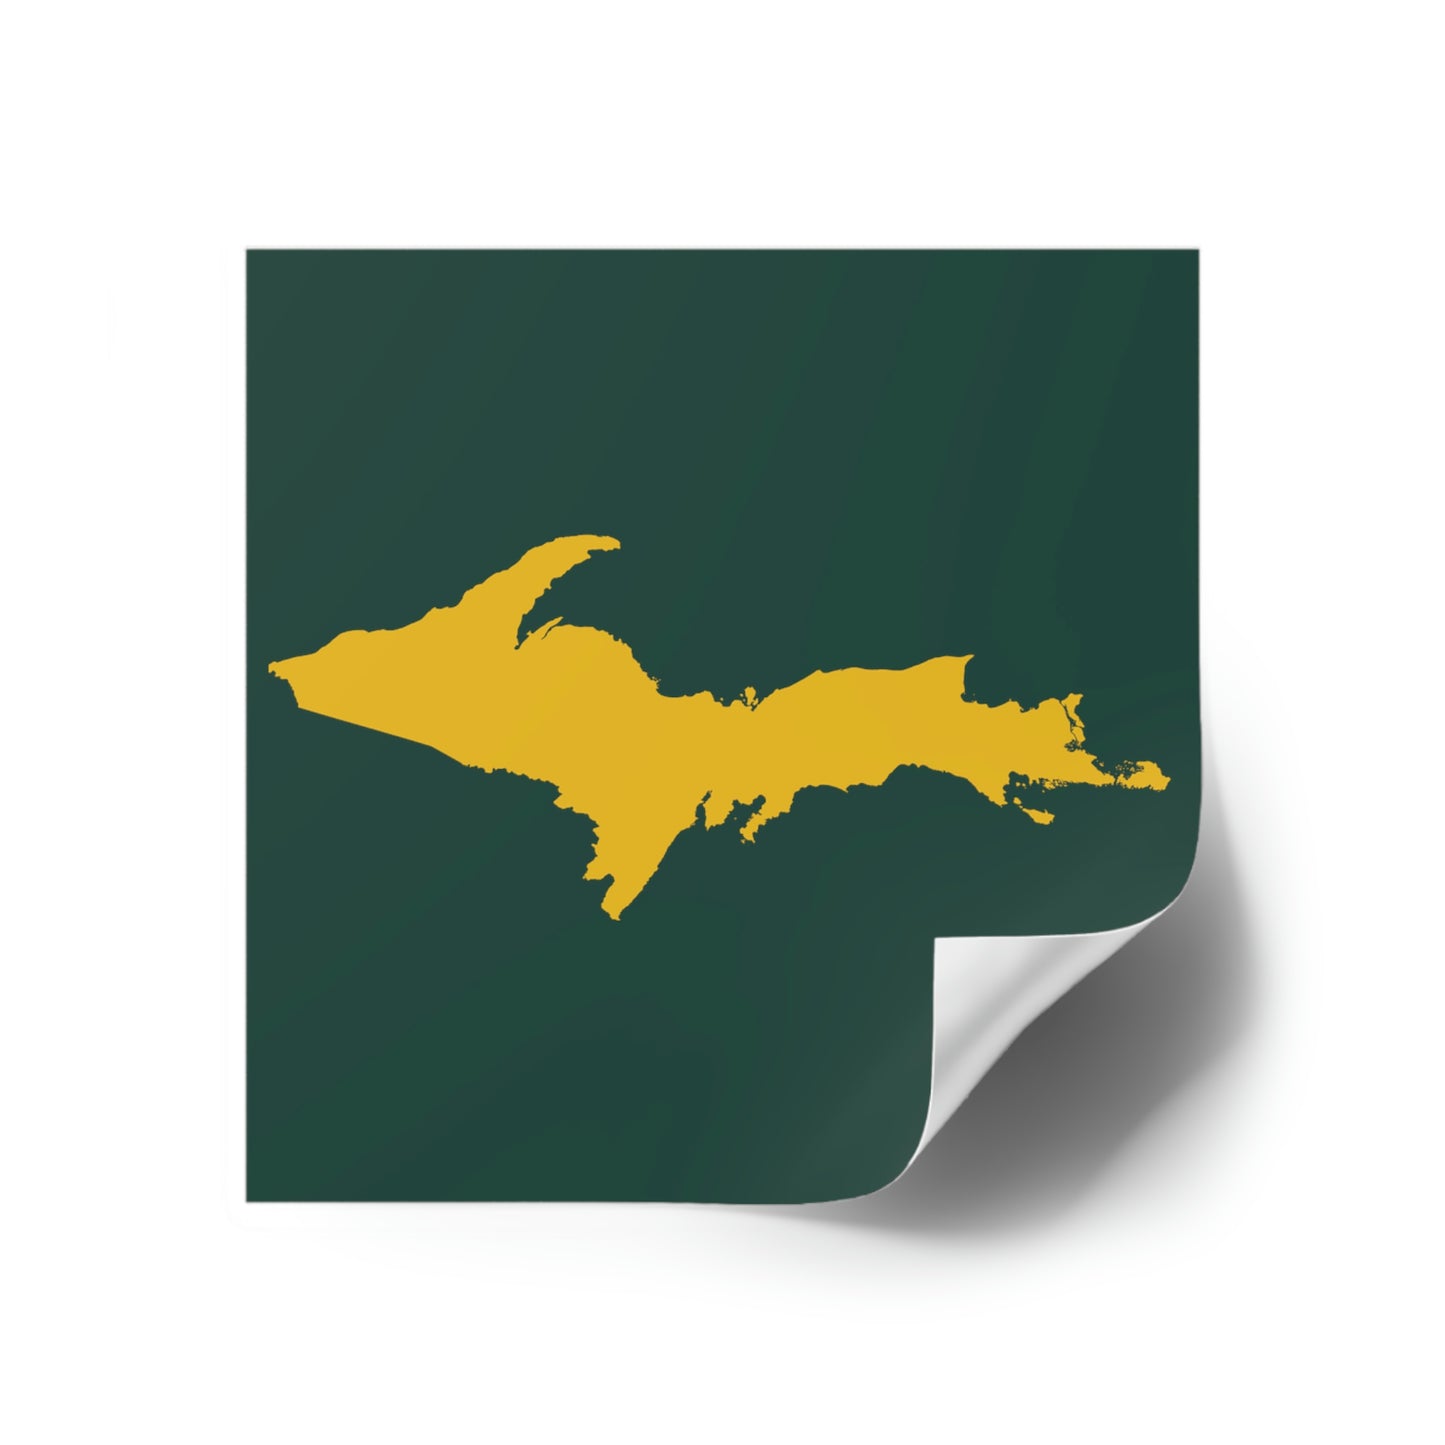 Michigan Upper Peninsula Square Sticker (Green w/ Gold UP Outline) | Indoor/Outdoor